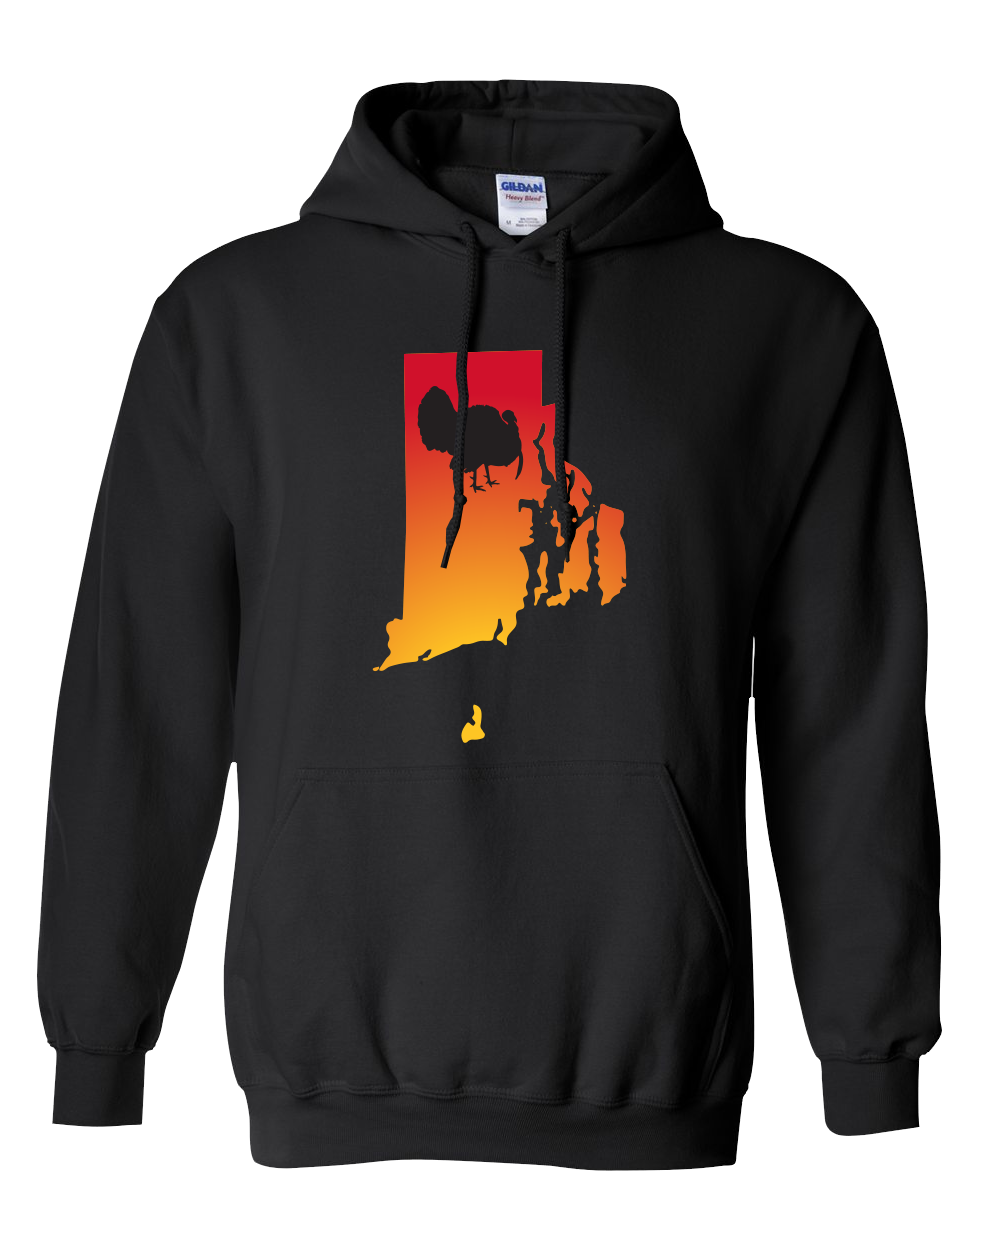 Pullover Hooded Sweatshirt Rhode Island Black Turkey Vibrant Design High Quality Tight Knit Ring Spun Low Maintenance Cotton Printed With The Newest Available Color Transfer Technology